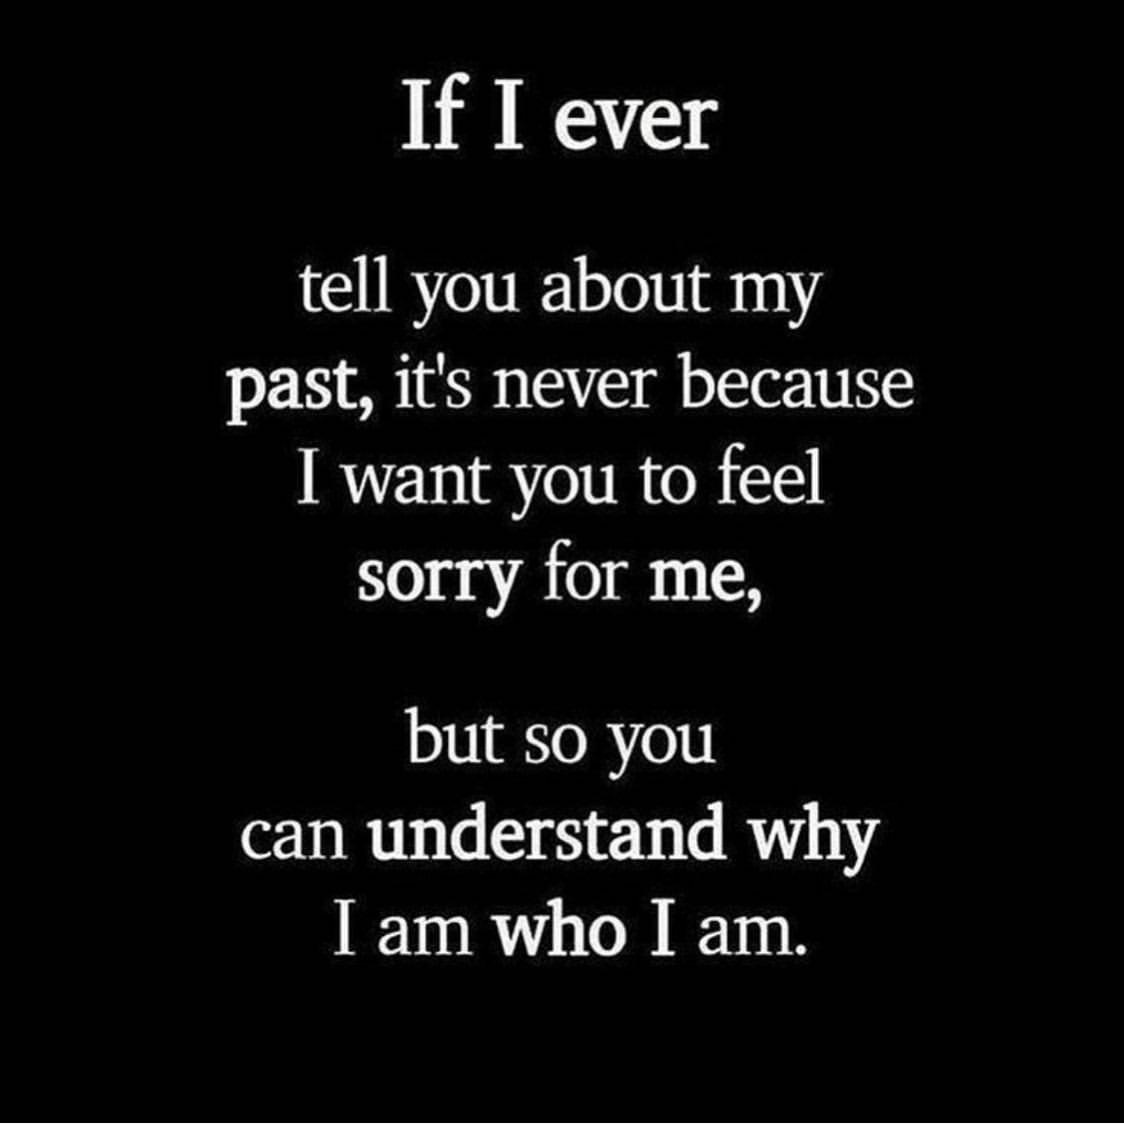 If I ever tell you about my past, it's never because I want you to feel sorry for me, but so you can understand why I am who I am.